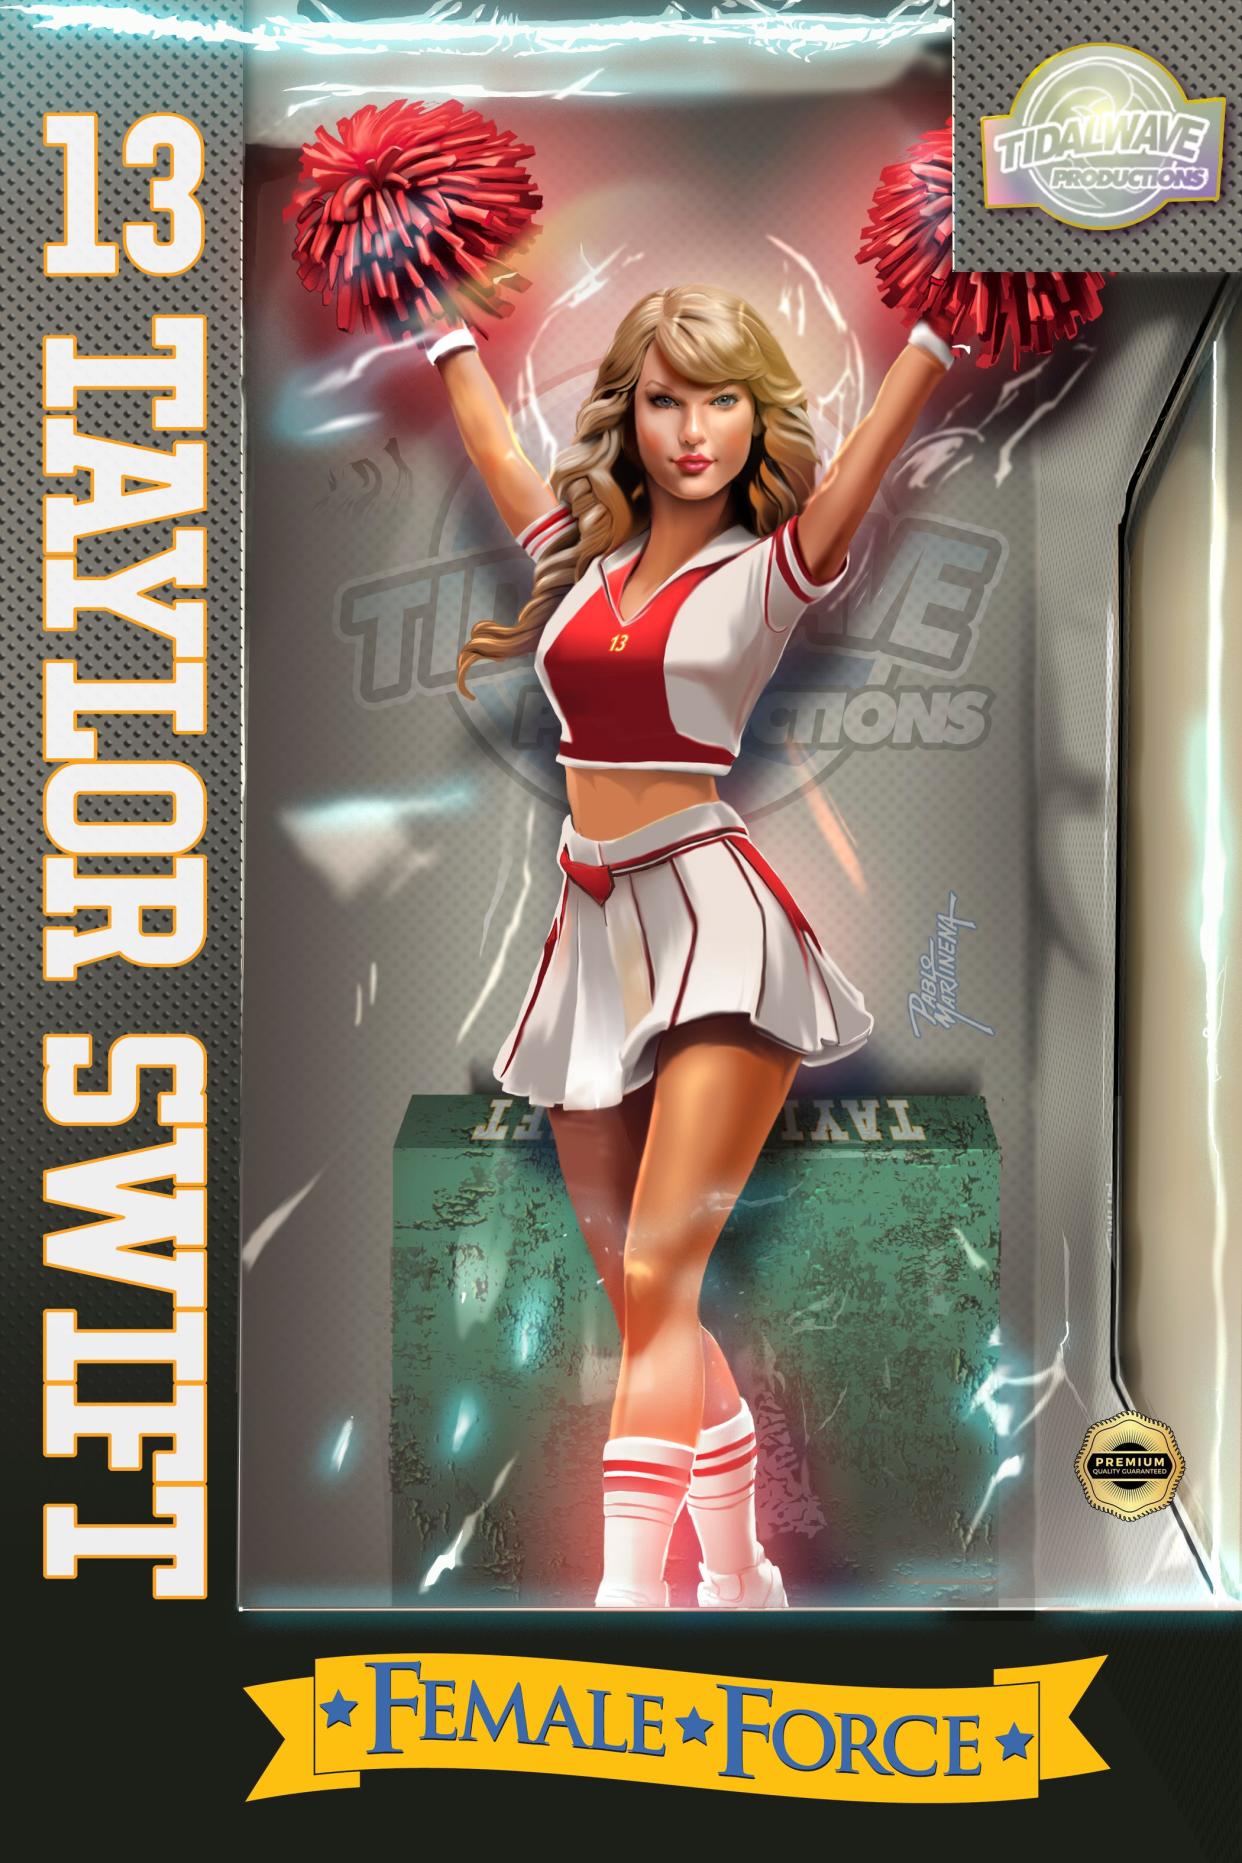 A variant cover of the comic book, "Fame: Taylor Swift," published by TidalWave Productions, a comic book and graphic novel publisher.